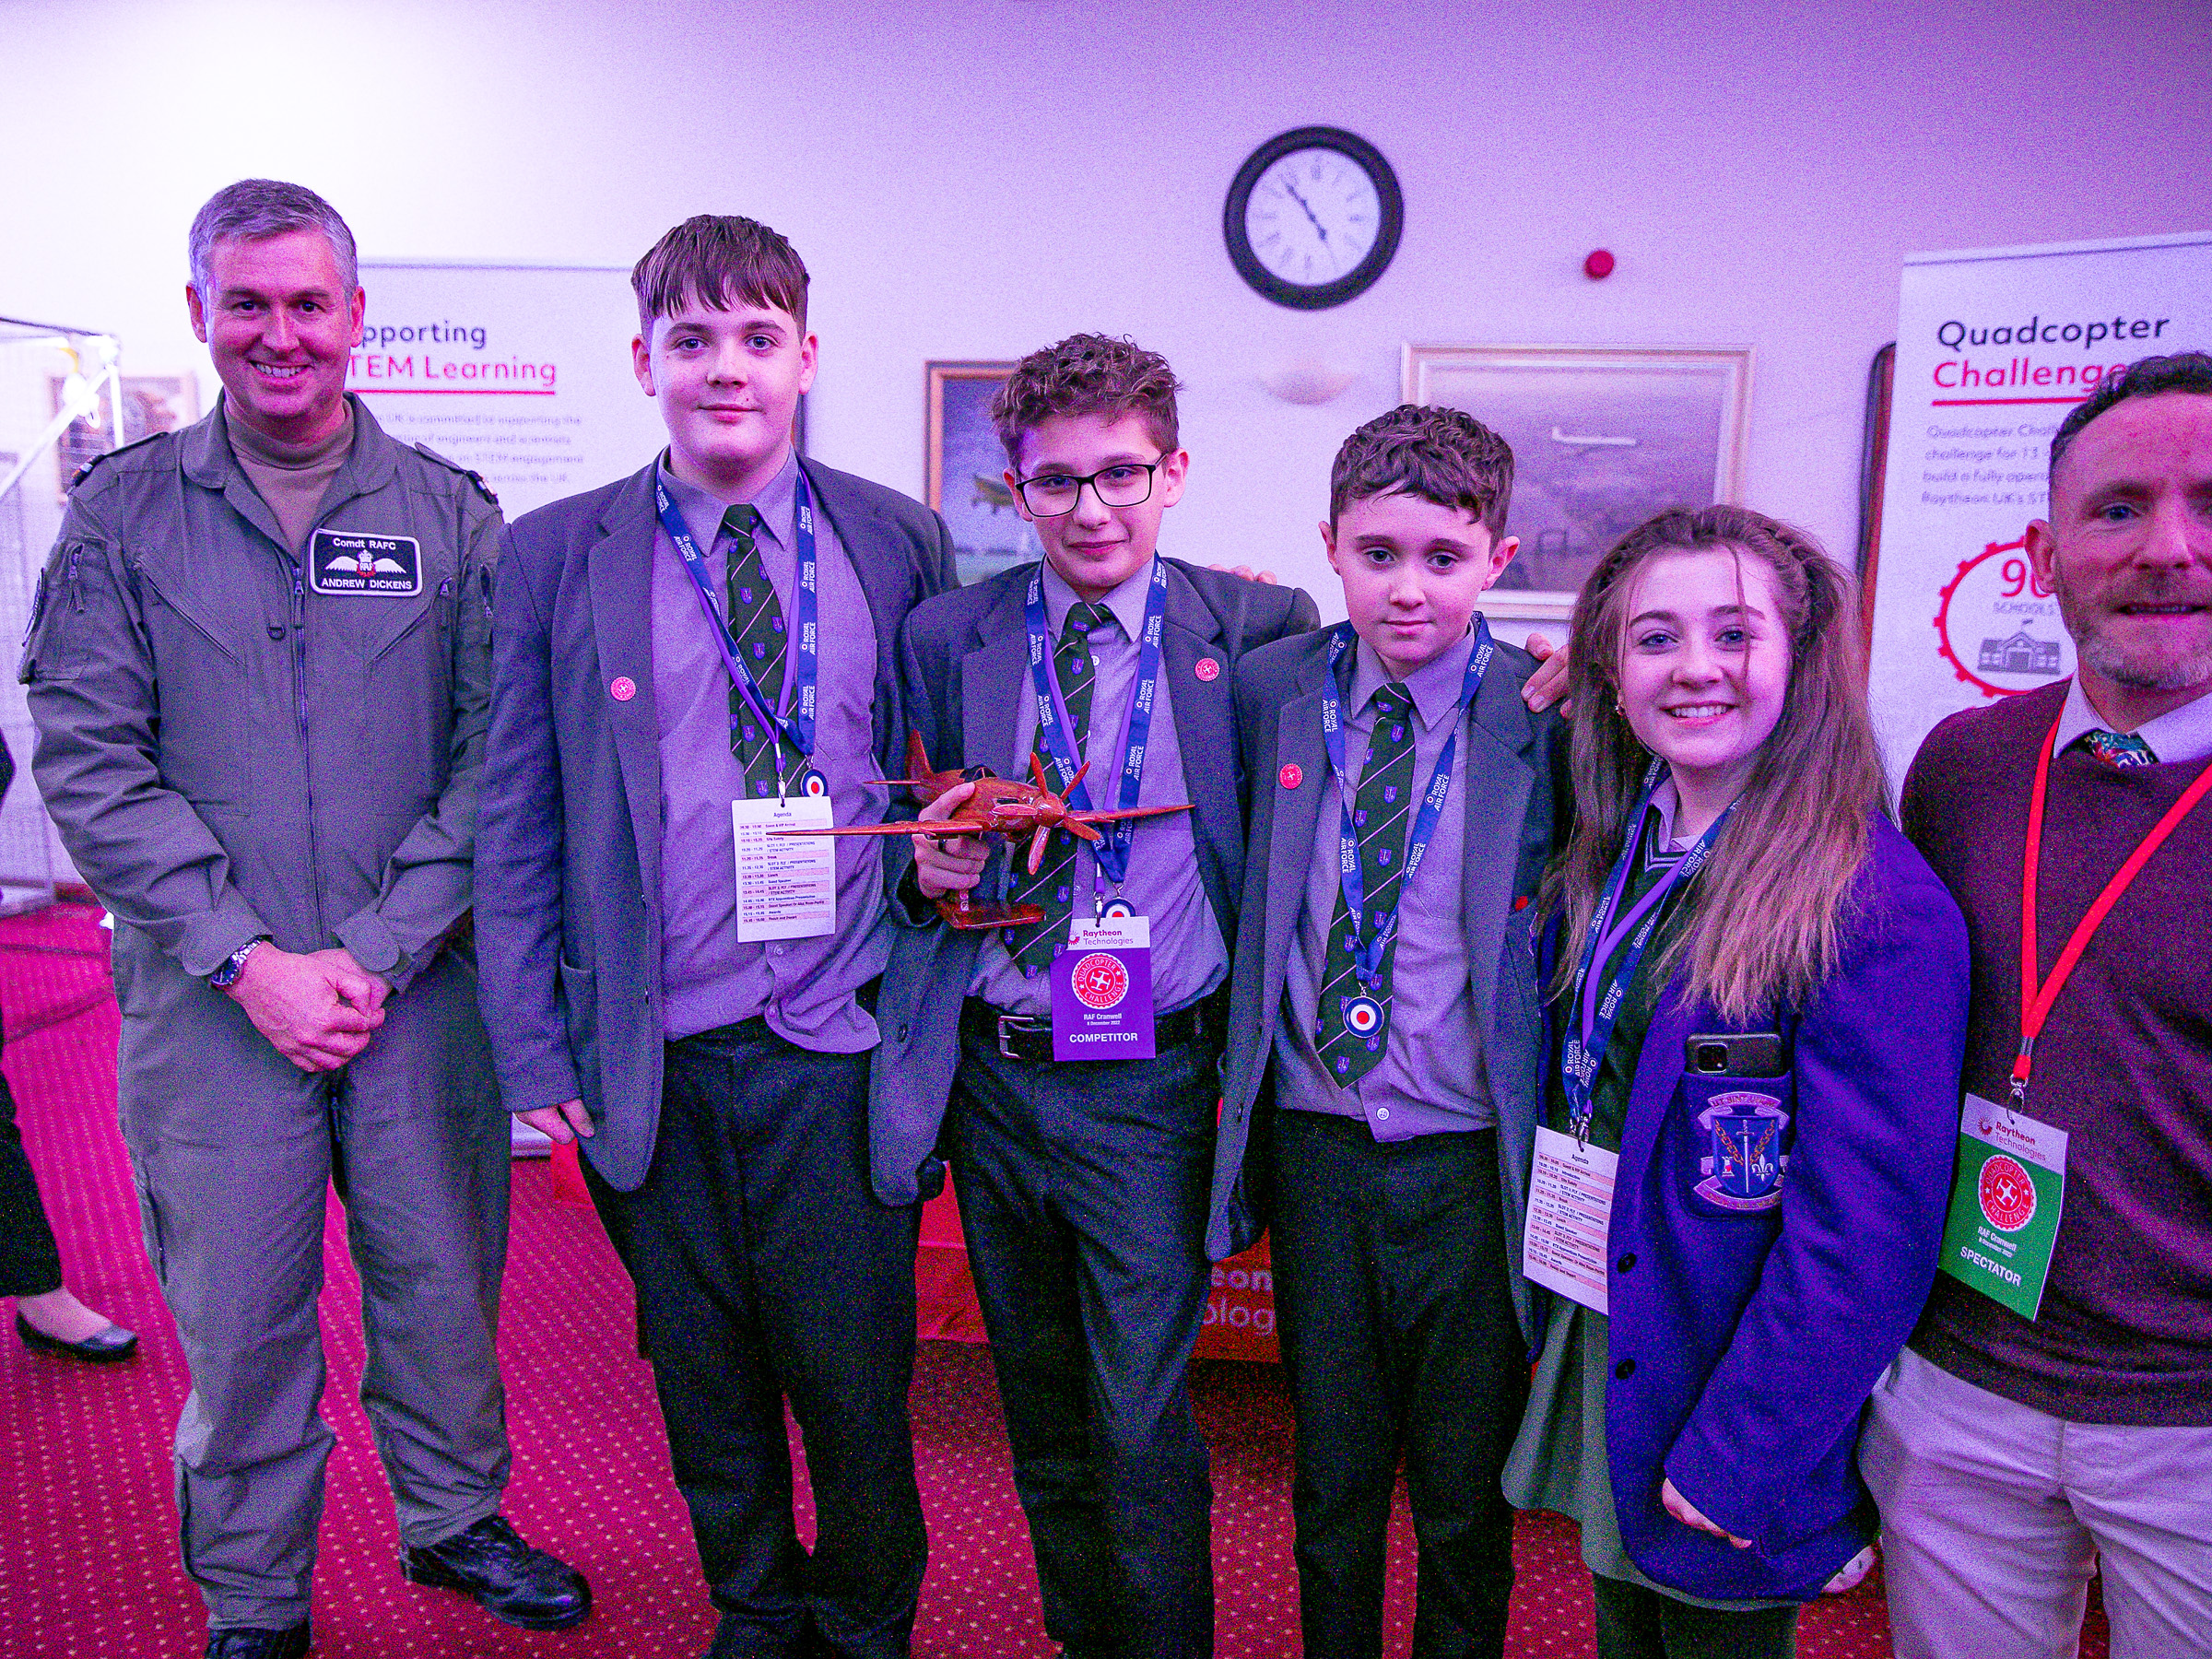 Image shows RAF pilots, civilians and school students with one holding a spitfire model award.